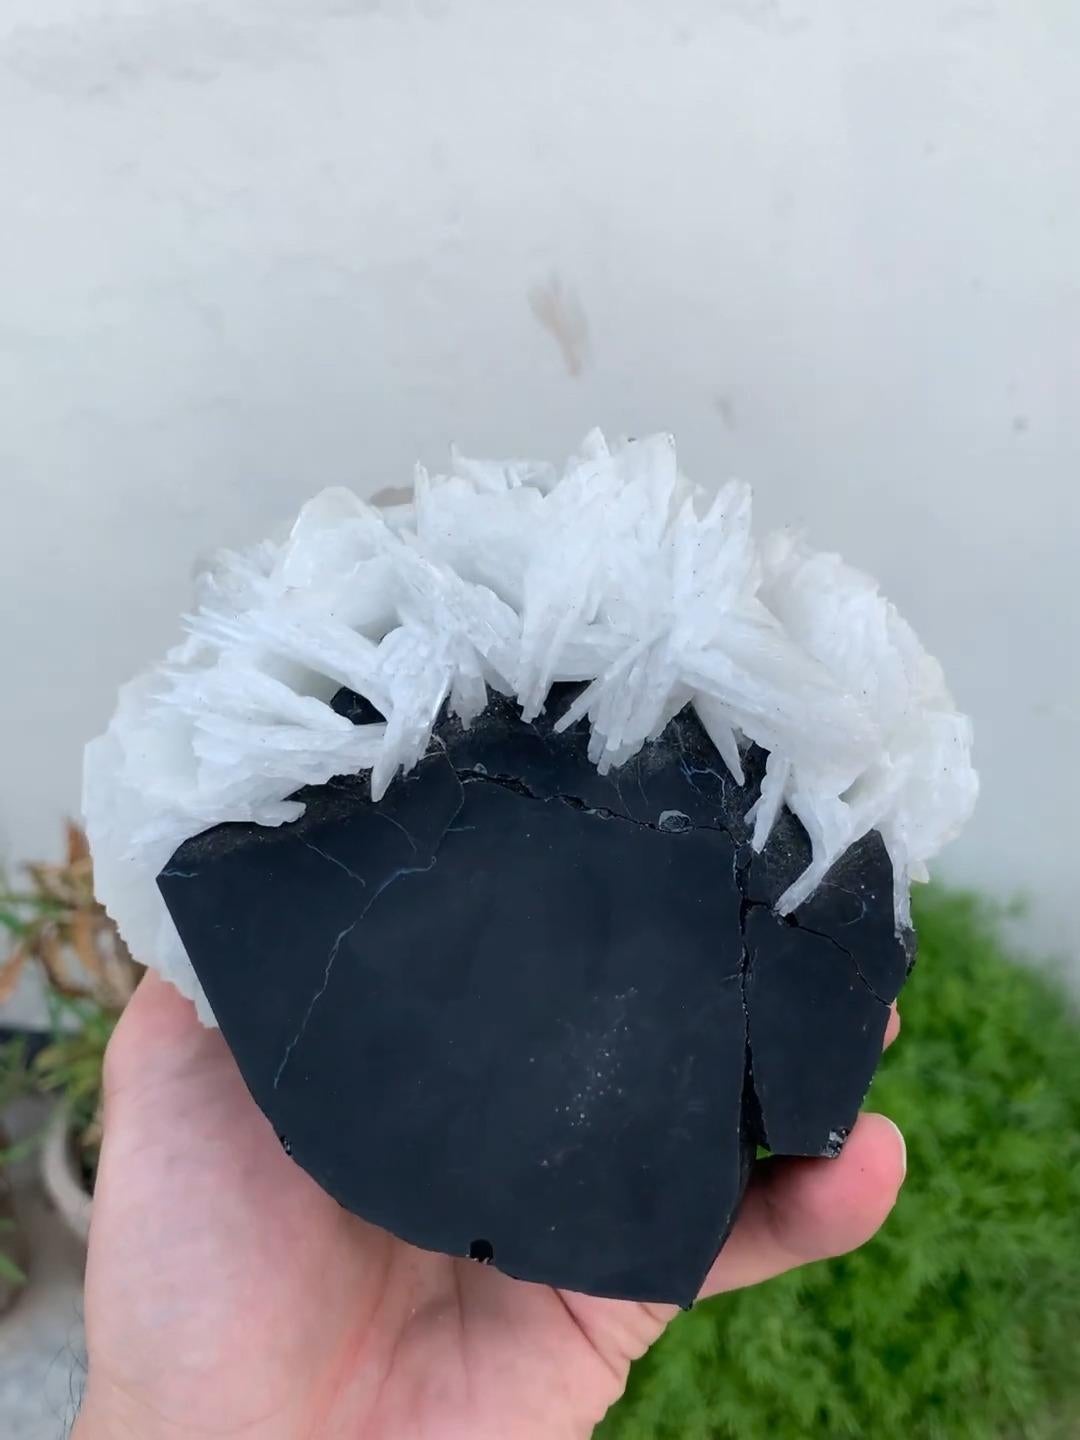 Modern Highly Striated Schorl Black Tourmaline With White Cleavelandite From Afghan For Sale